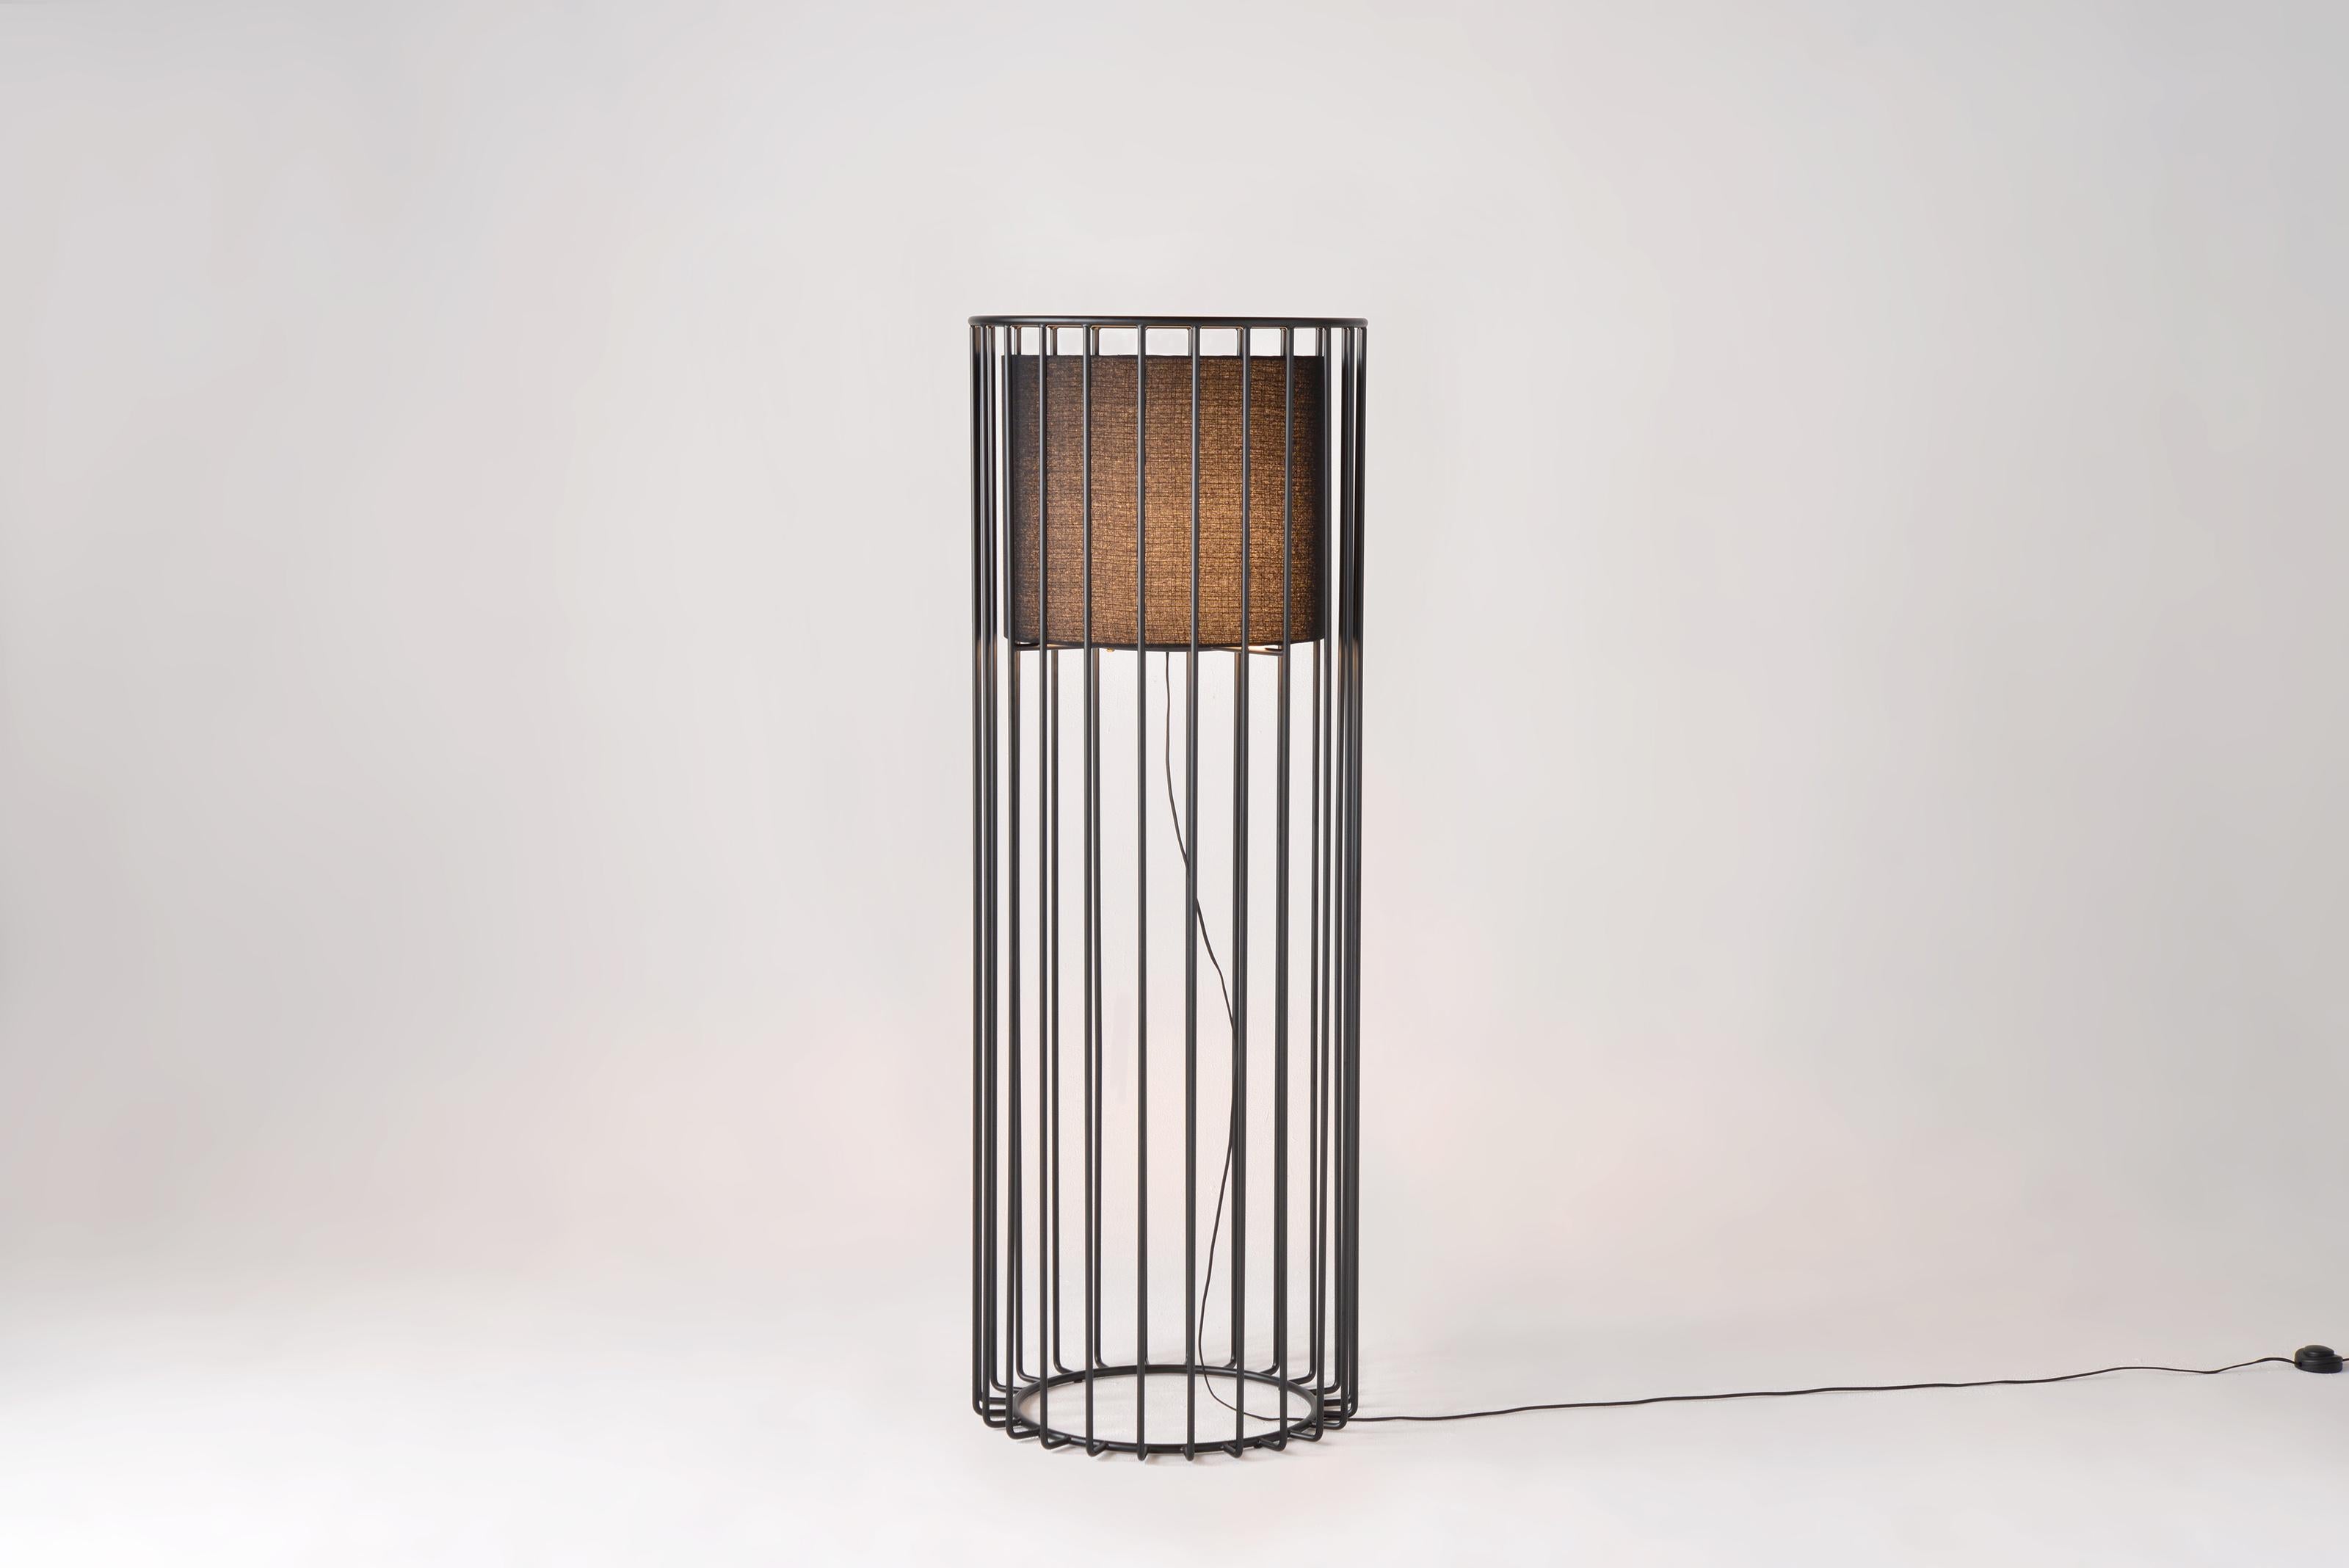 Inner Beauty Tall Floor Light by Phase Design
Dimensions: Ø 61 x H 182.9 cm. 
Materials: Black linen and powder-coated metal.

Solid steel bar available in a smoked brass, polished chrome, burnt copper, gloss or flat black and white powder coat.